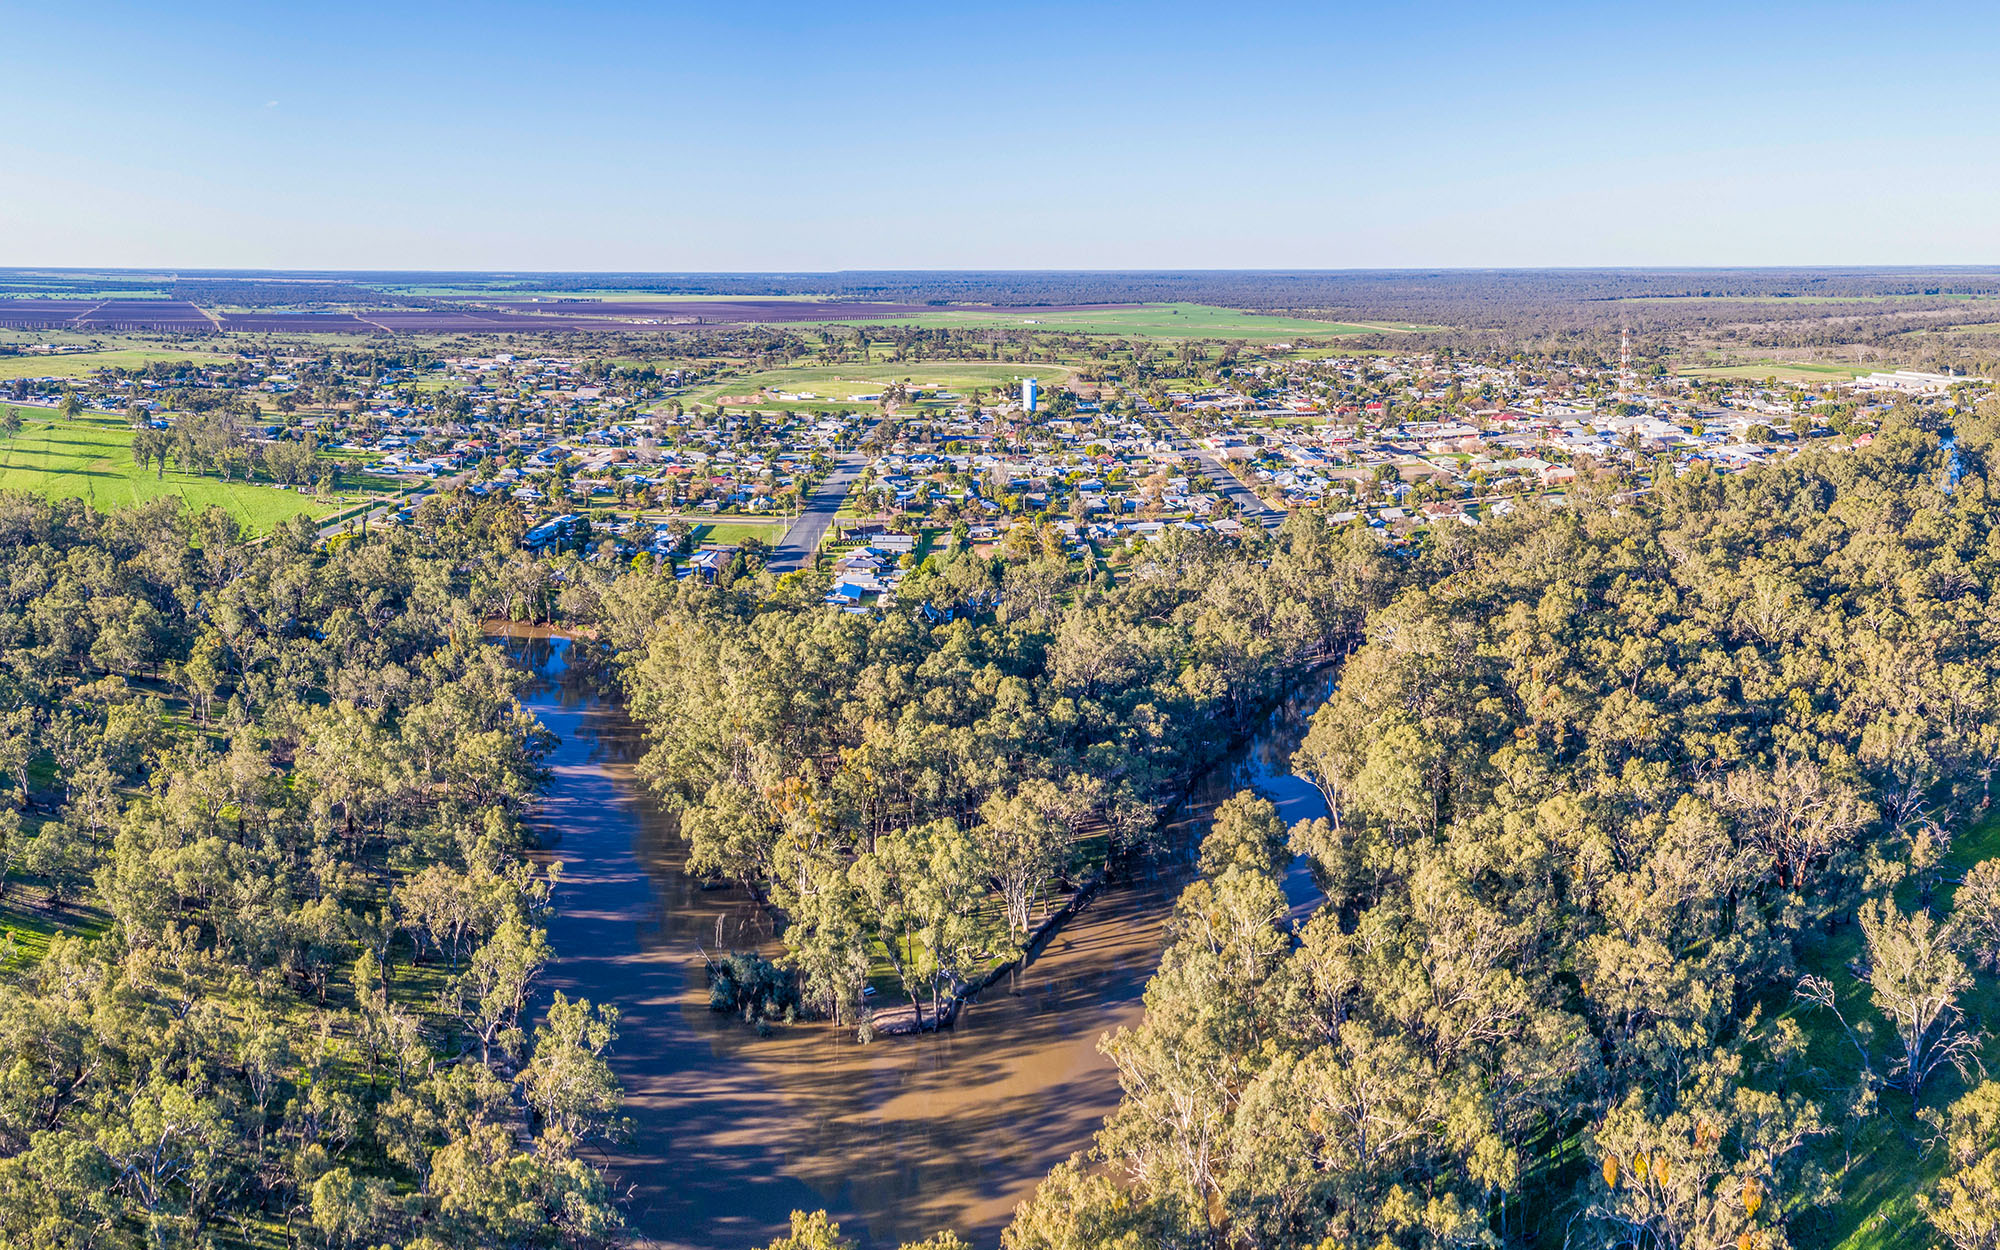 Aerial view of the Murray River with trees along the bank snaking it's way around a town on the background